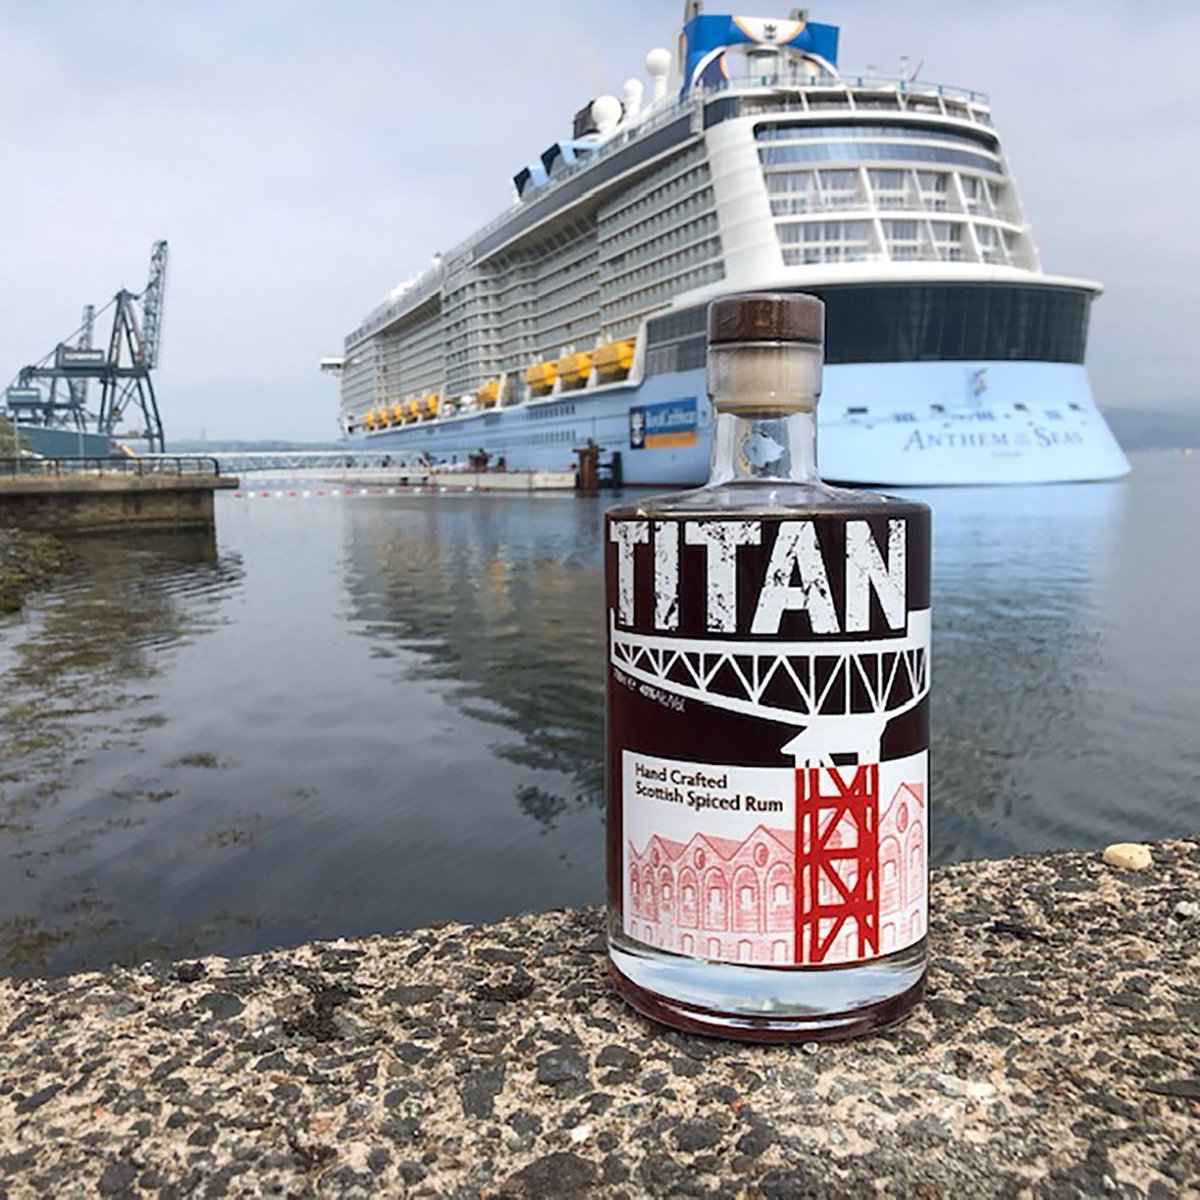 We're excited for the start of cruise ship season here in Greenock later this month! It's a chance to welcome new friends and share our rum with the world. 
.
#Greenock #CruiseShipSeason ##OceanTerminal #BritishIslesCruise #RumLovers #ScottishRum #WelcomeAboard